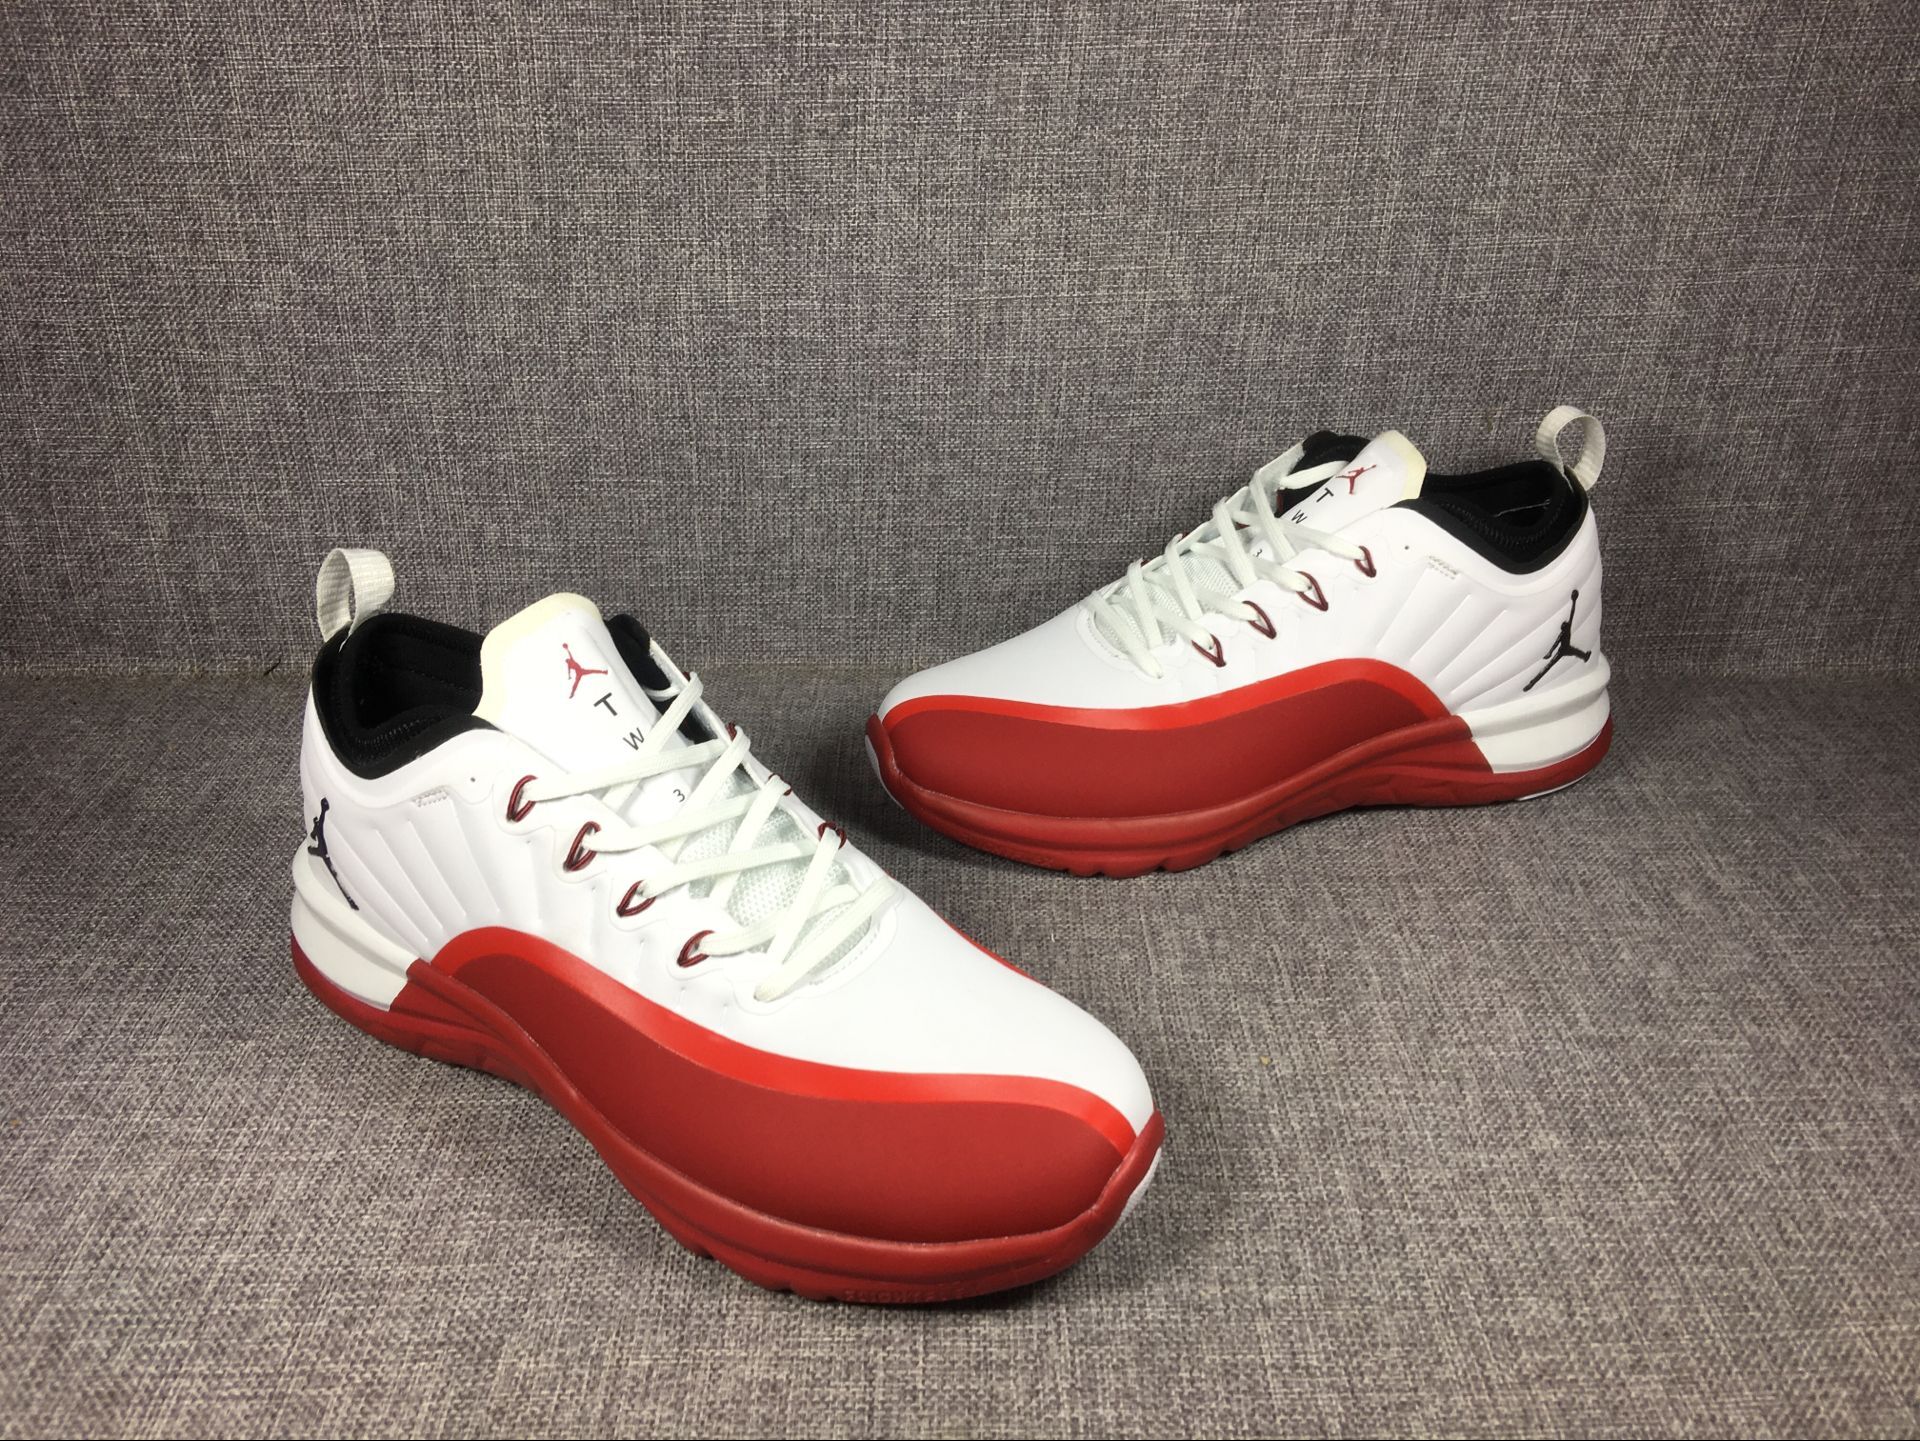 2018 New Air Jordan 12 Low White Red Shoes